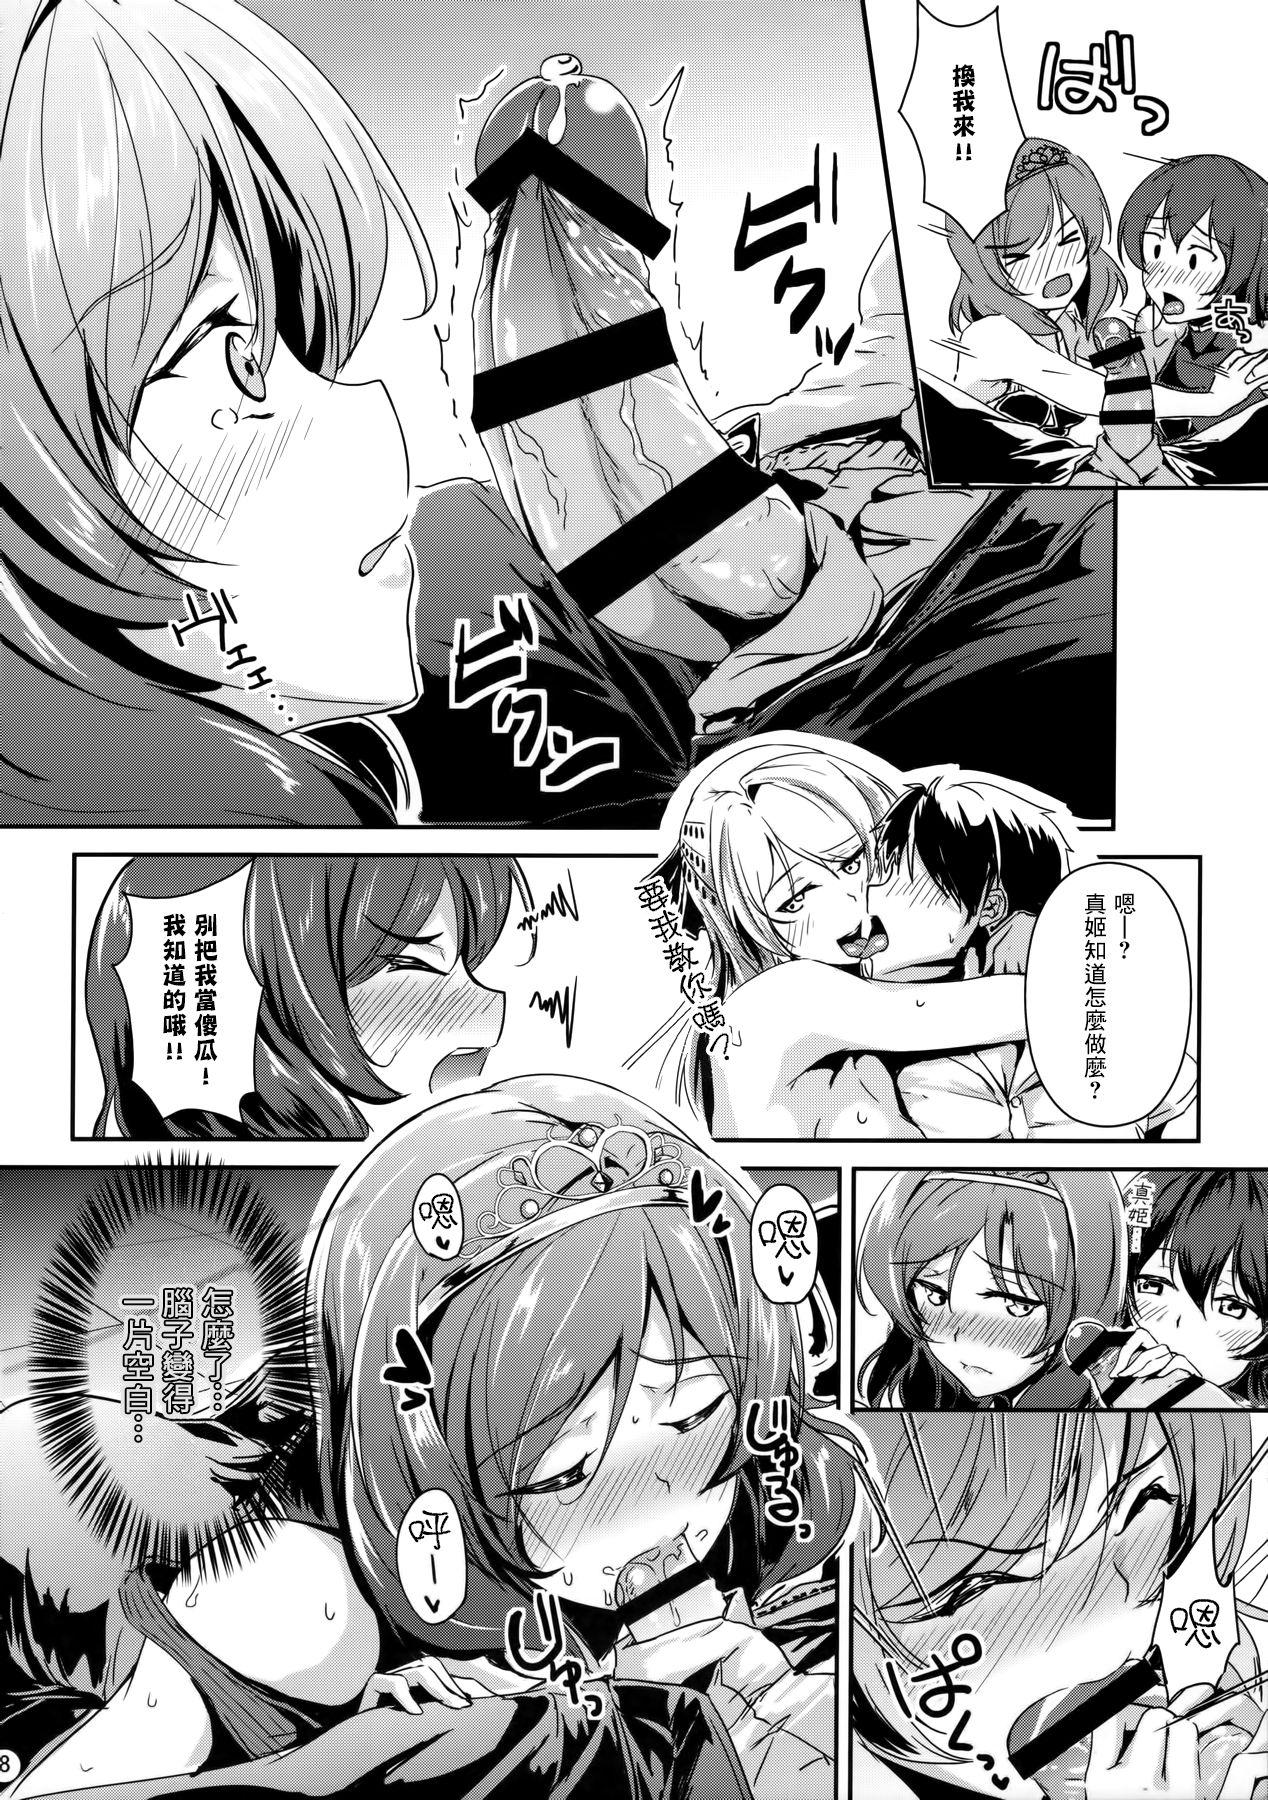 Spit secret in my heart - Love live Ameture Porn - Page 7